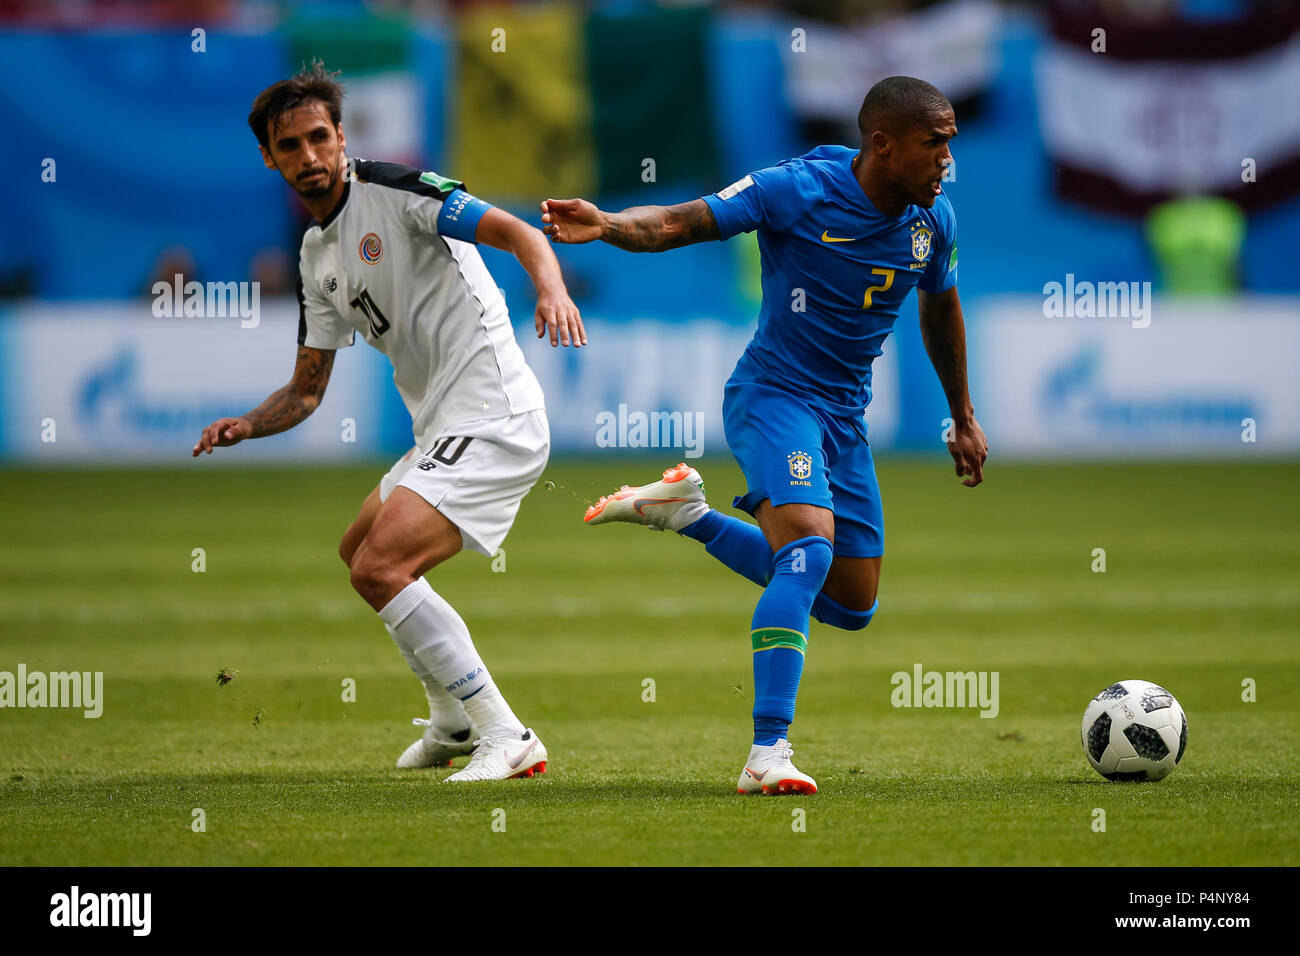 Saint Petersburg, Russia. 22nd June 2018. Bryan Ruiz of Costa Rica and Douglas Costa of Brazil during the 2018 FIFA World Cup Group E match between Brazil and Costa Rica at Saint Petersburg Stadium on June 22nd 2018 in Saint Petersburg, Russia. (Photo by Daniel Chesterton/phcimages.com) Credit: PHC Images/Alamy Live News Stock Photo